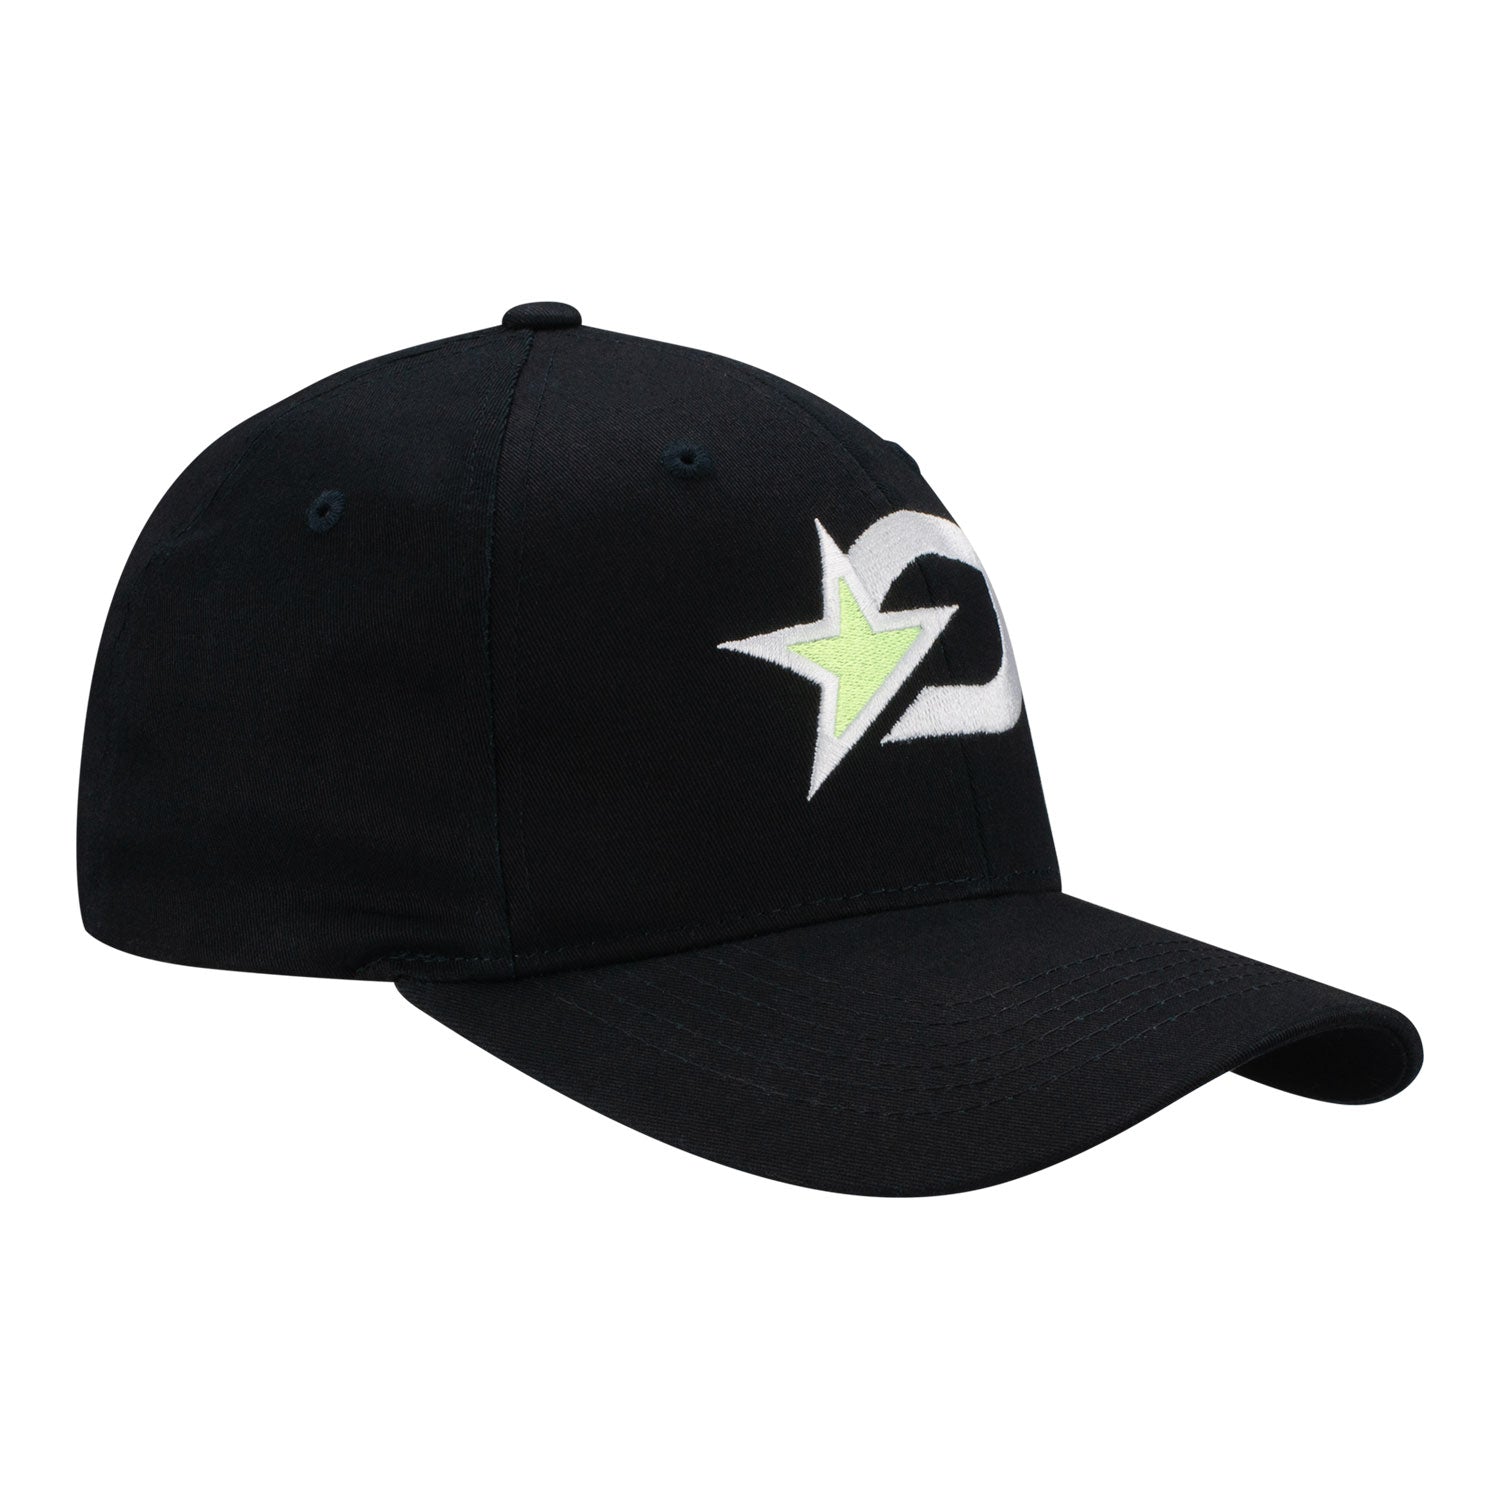 Optic Texas Black Dad Hat - Front Right Side View